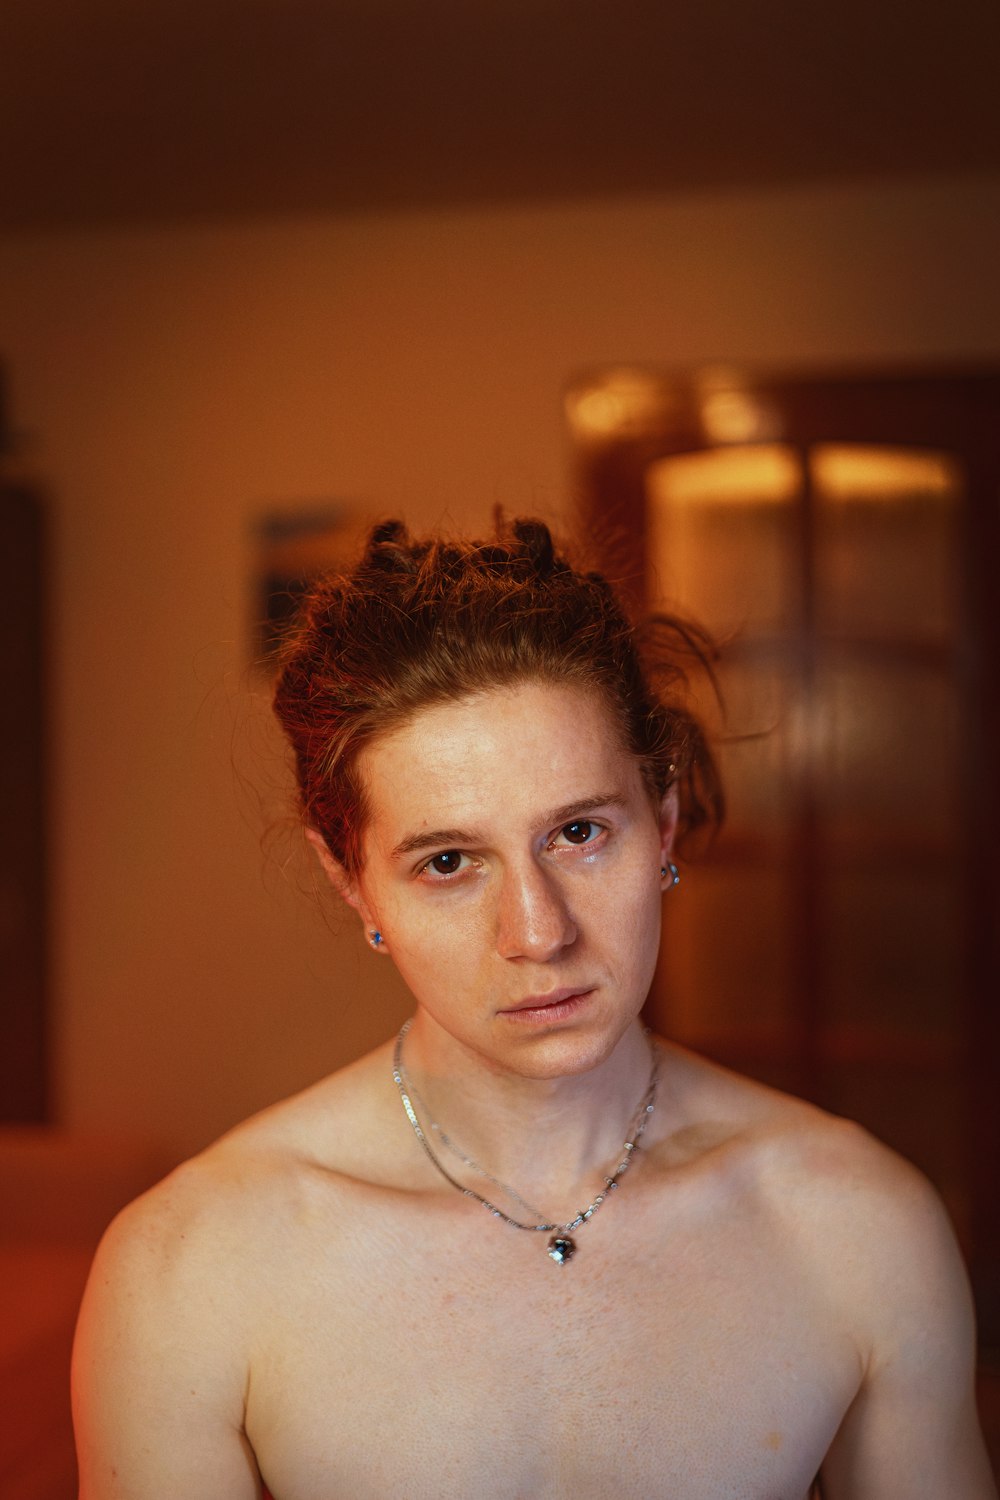 a shirtless woman with a necklace on her neck